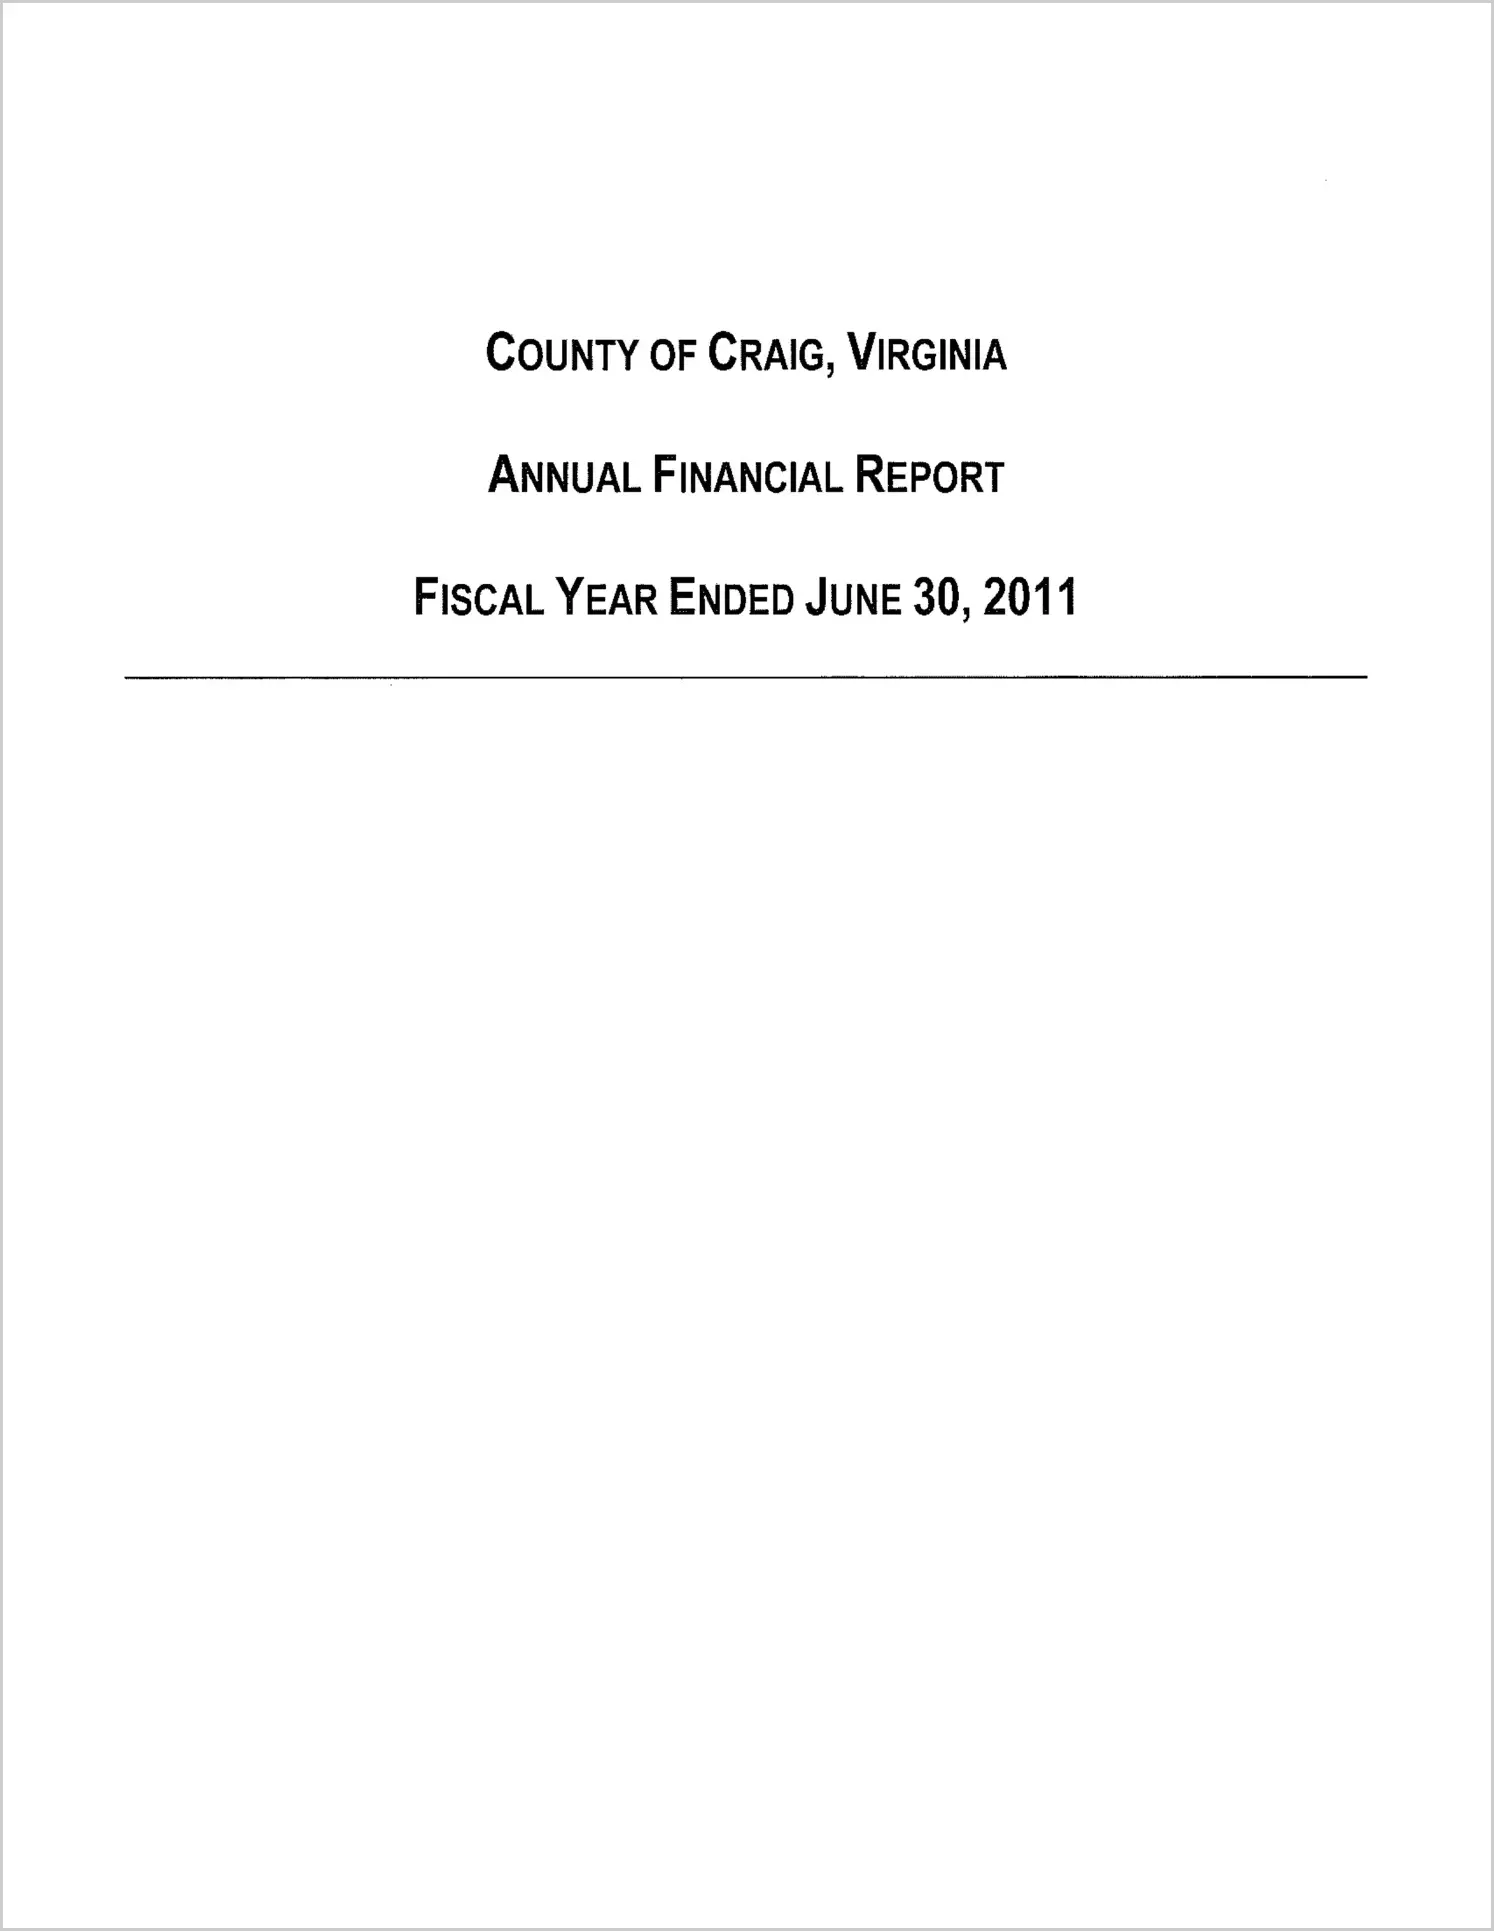 2011 Annual Financial Report for County of Craig